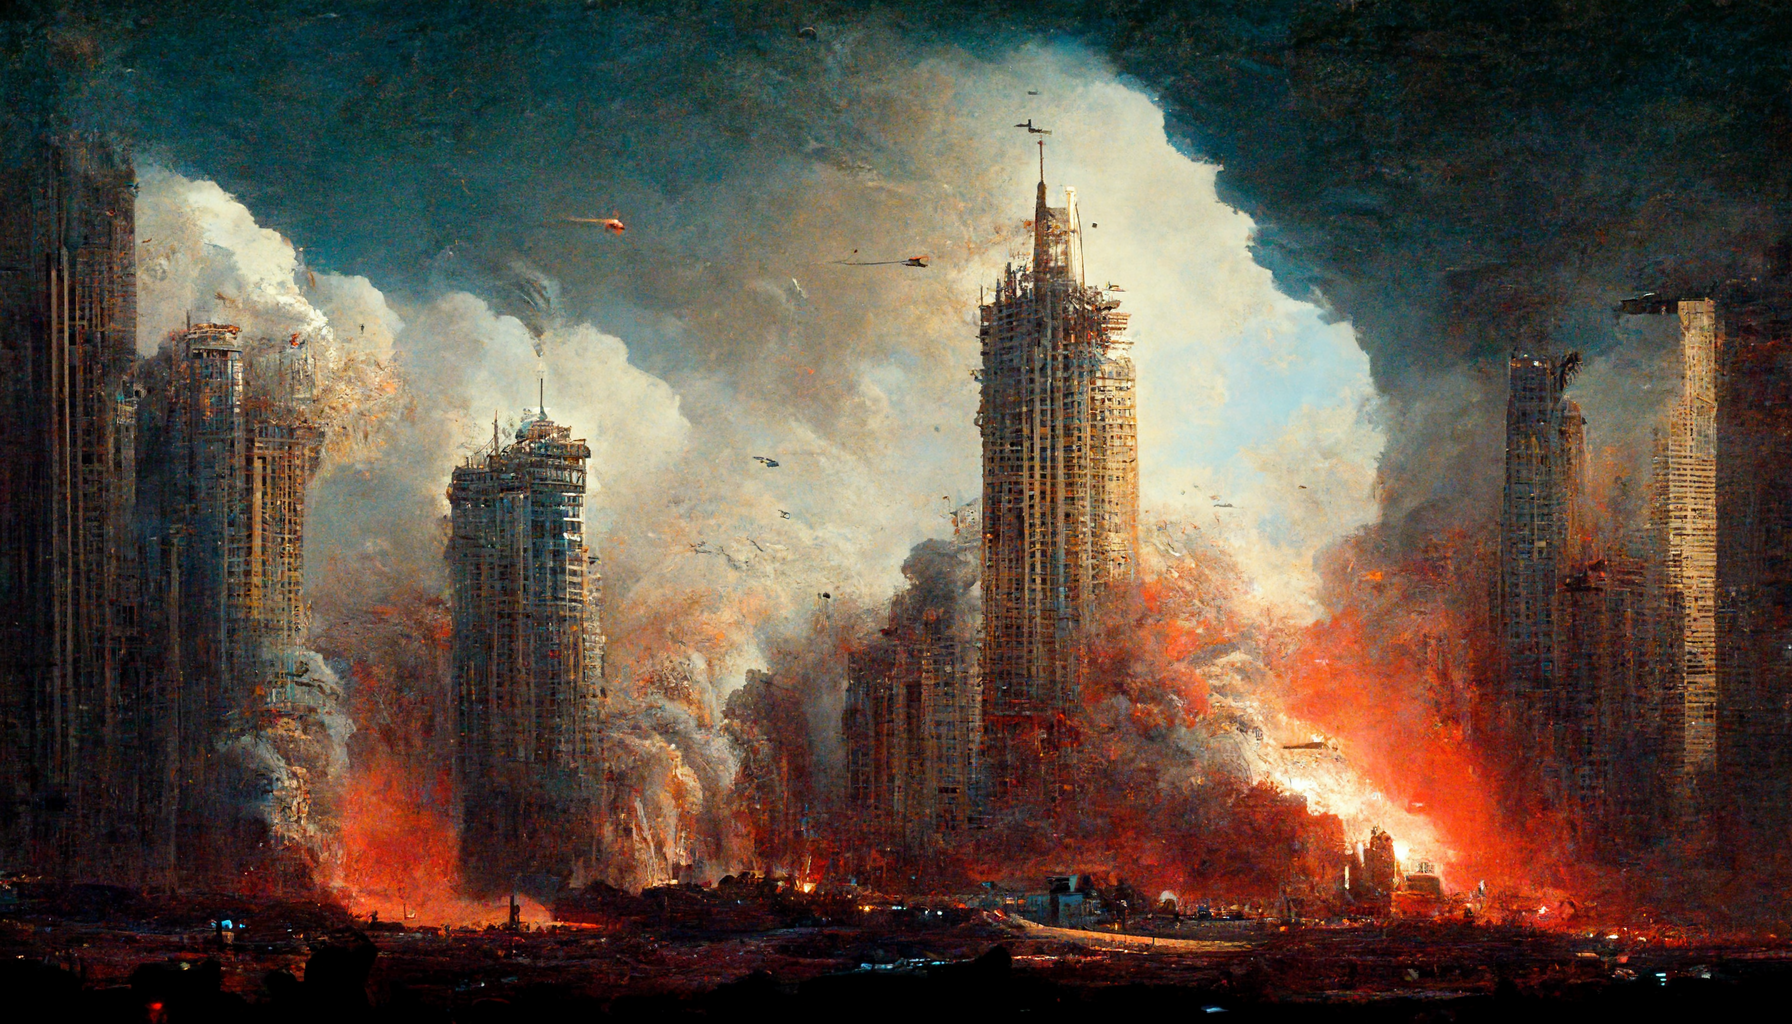 'The fall of skyscrapers.'
